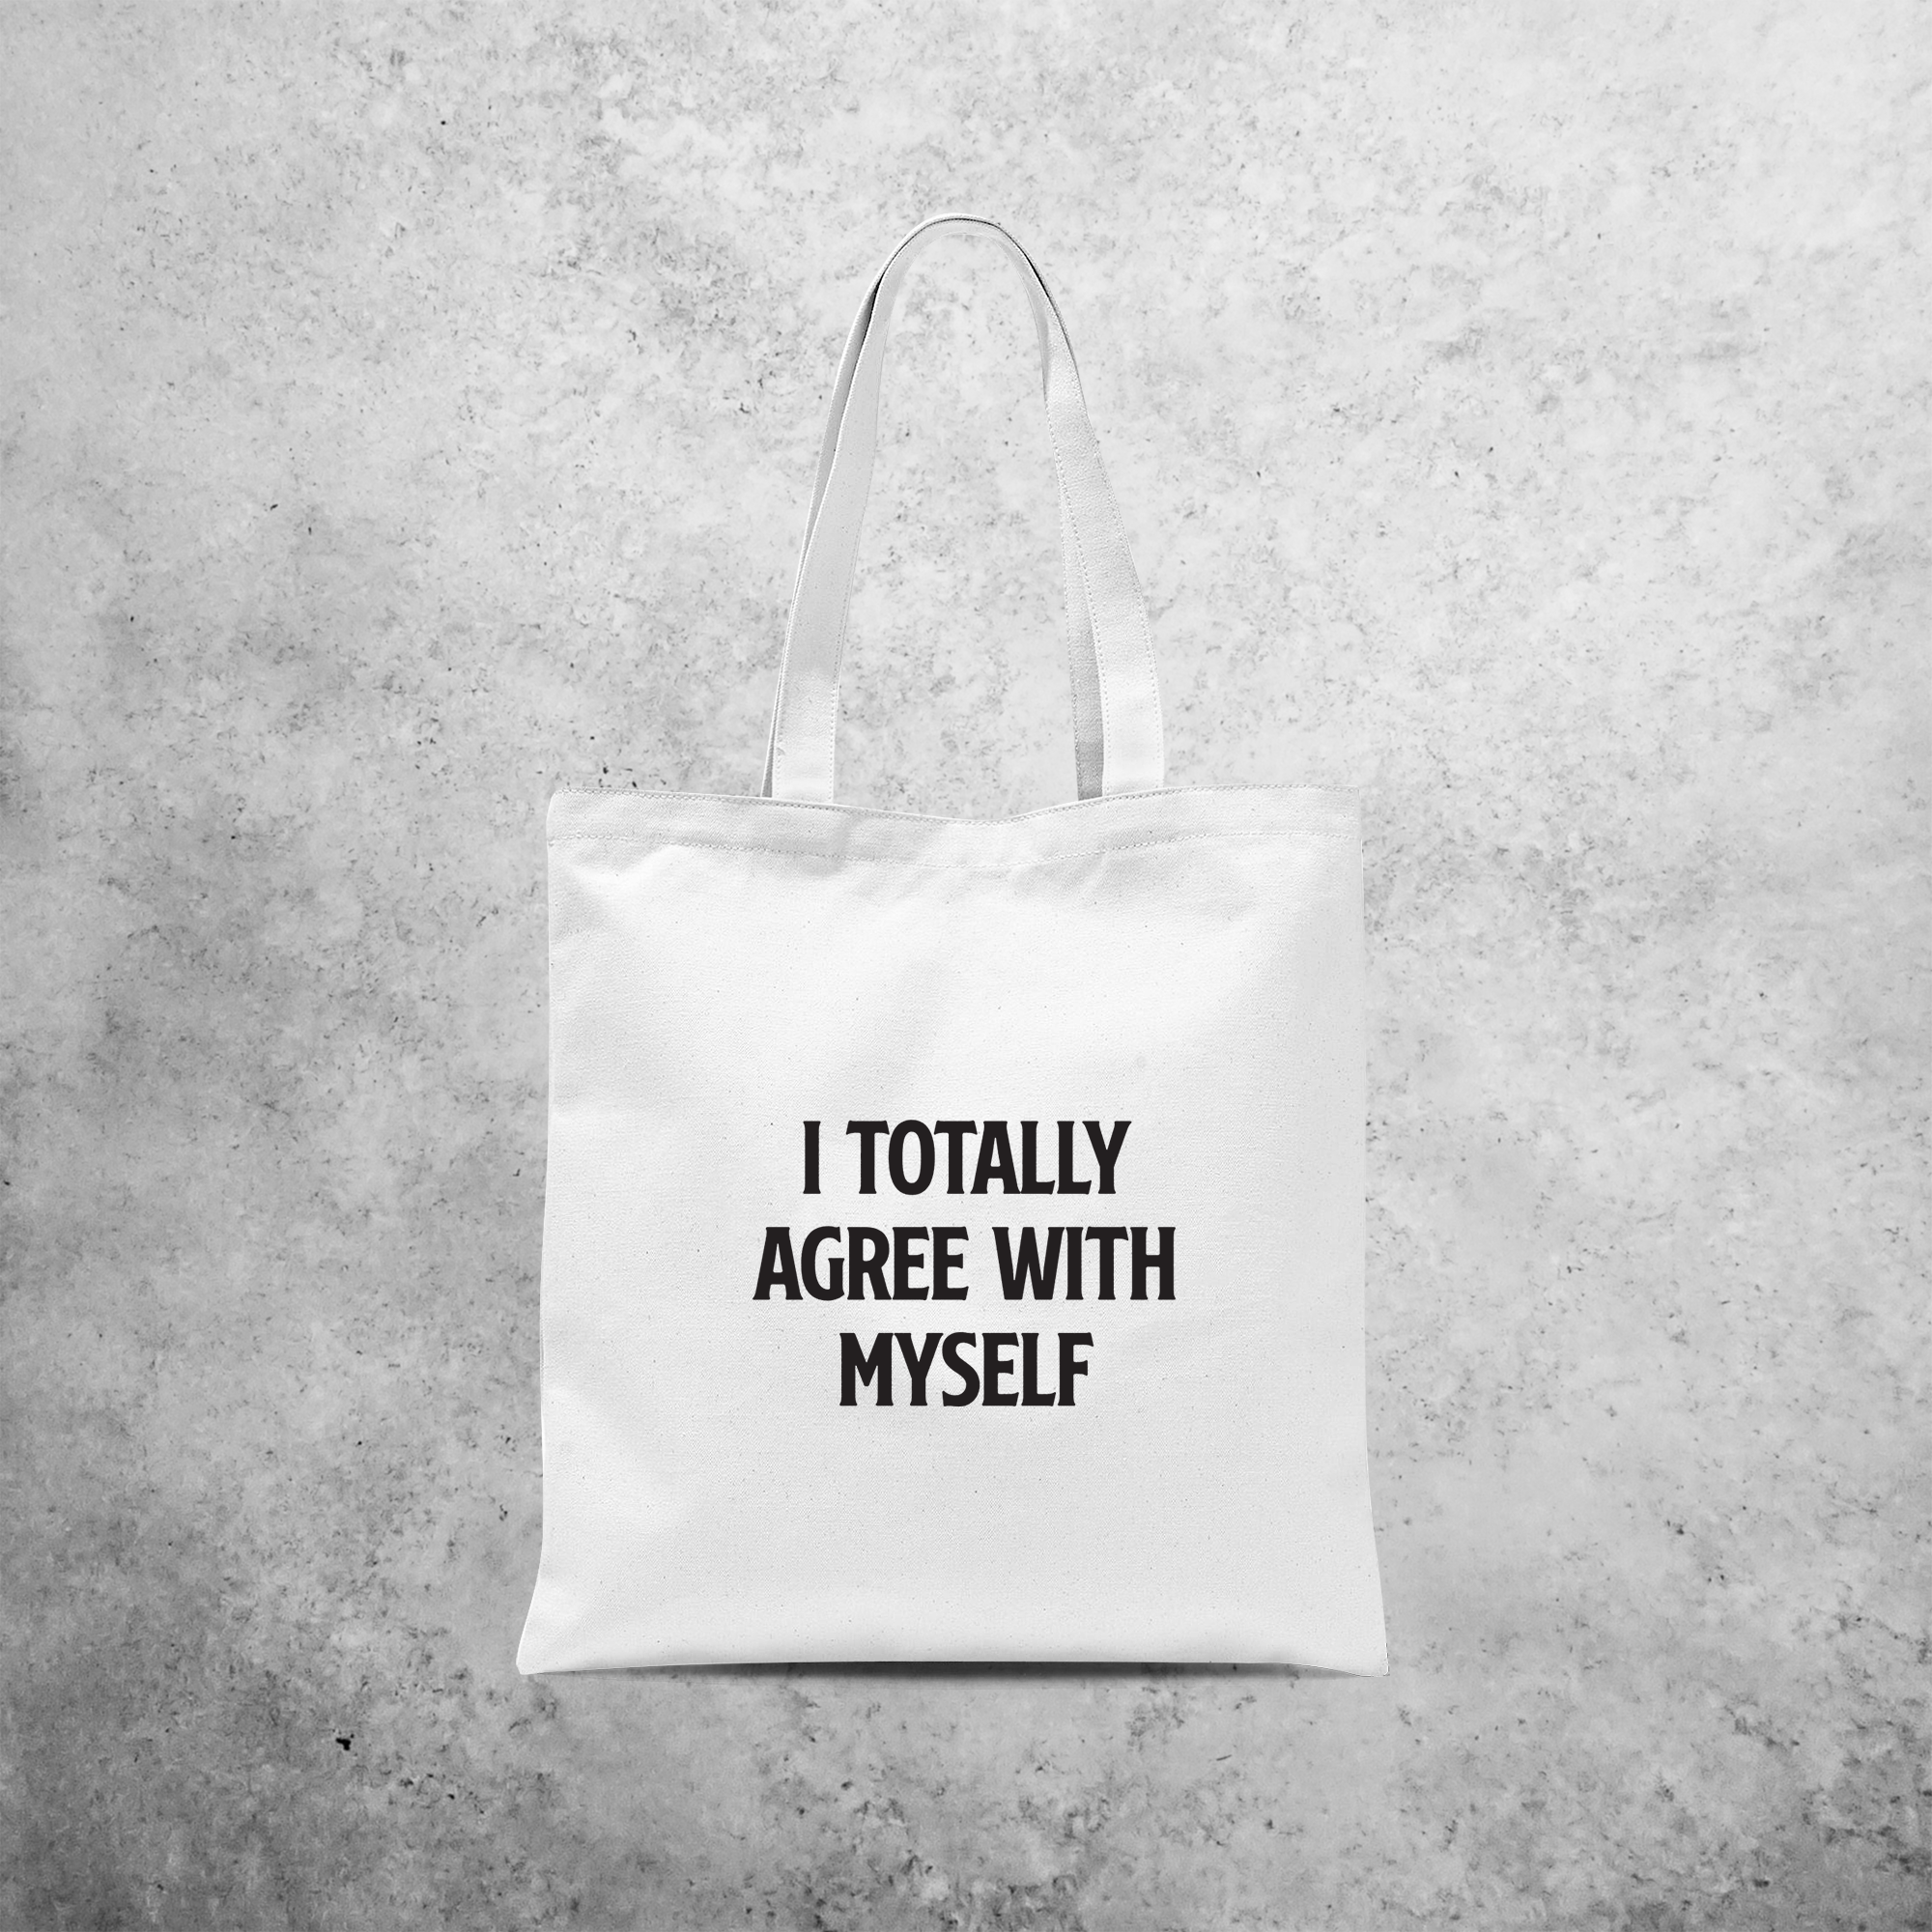 'I totally agree with myself' tote bag